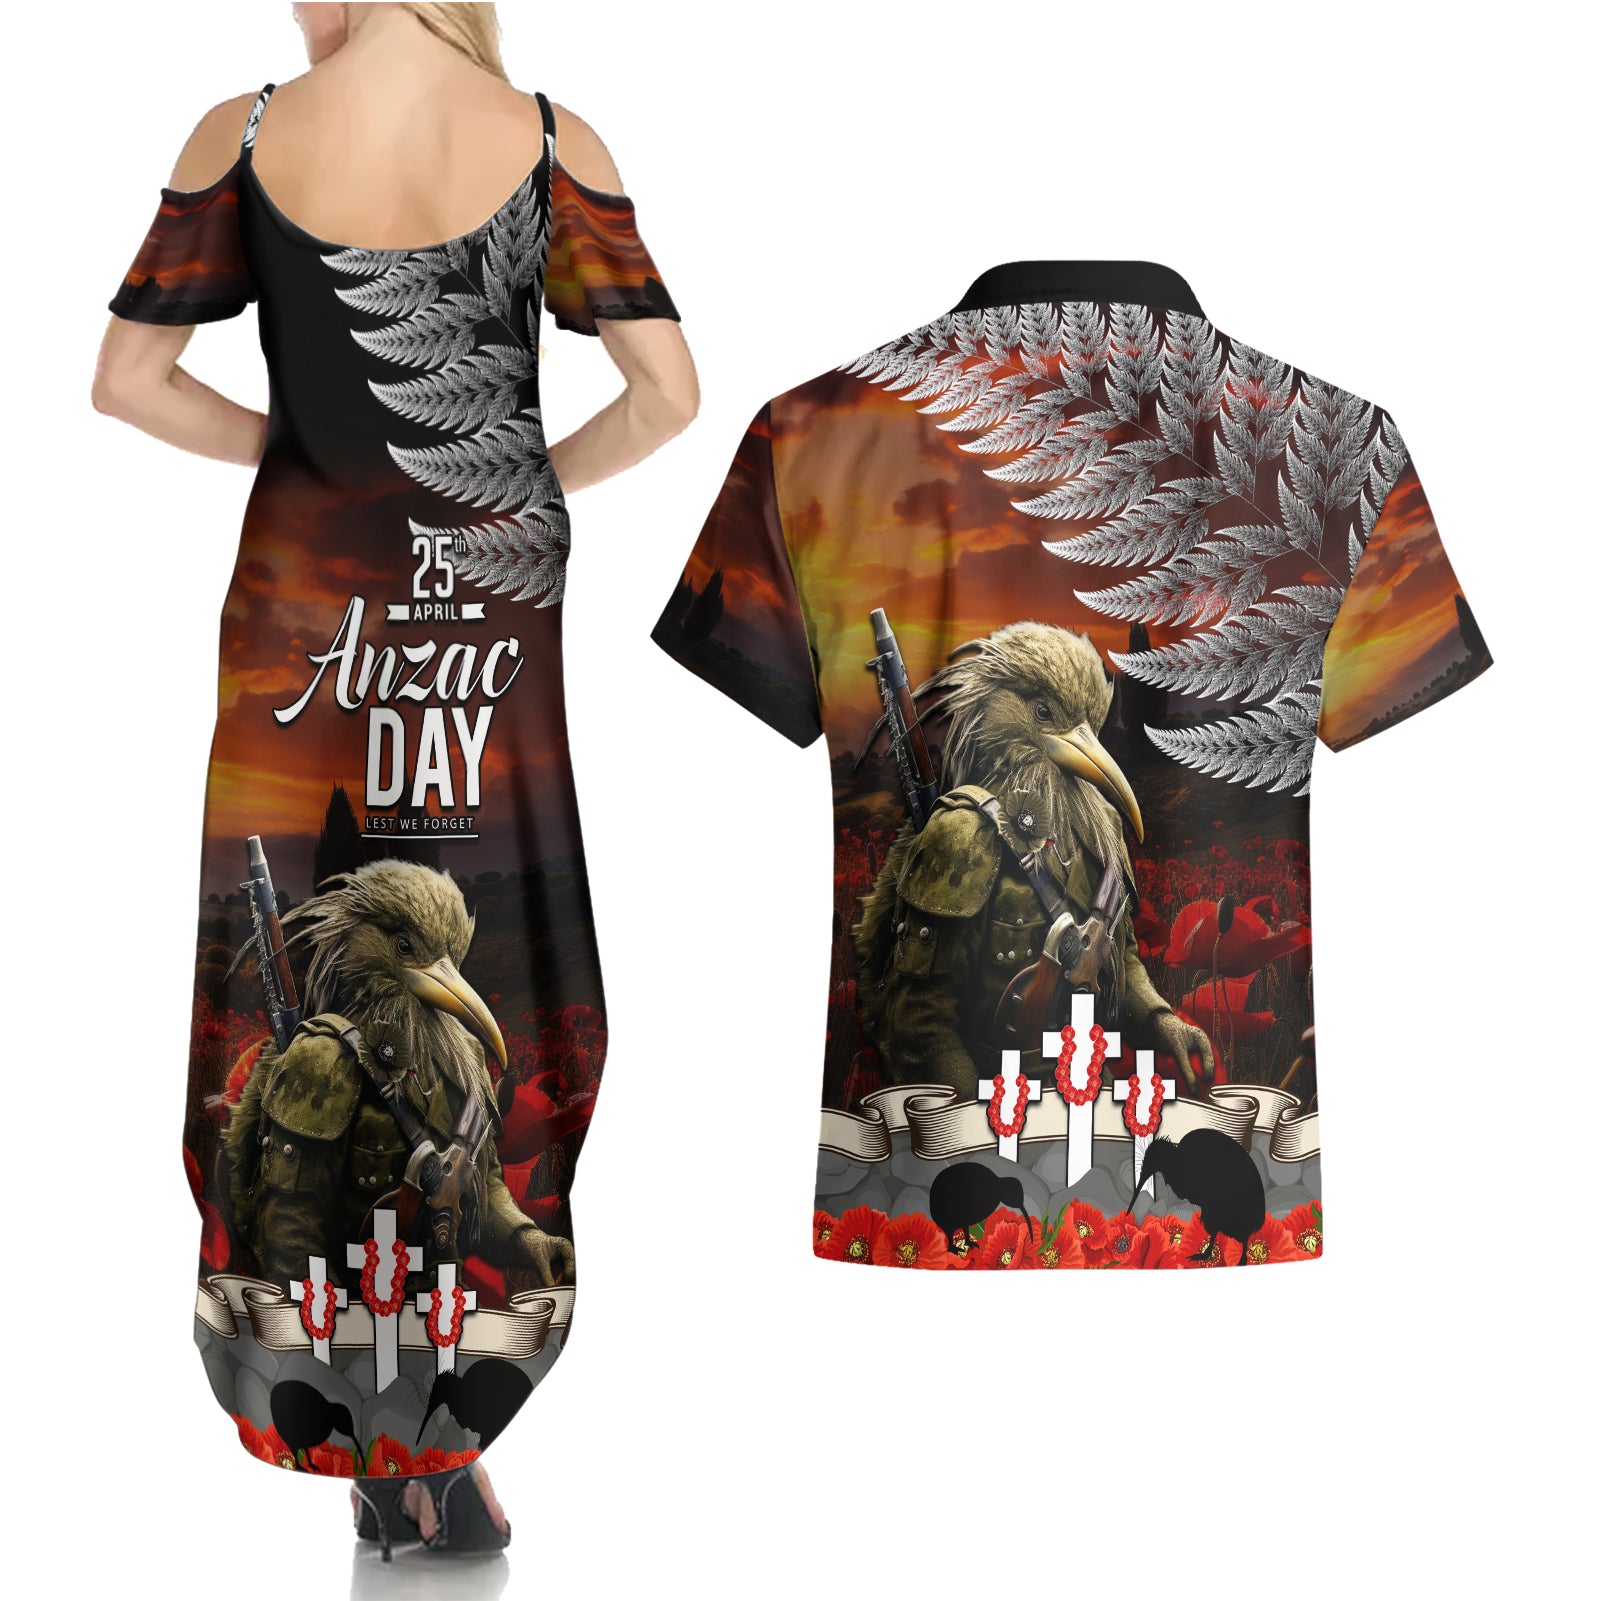 New Zealand ANZAC Day Couples Matching Summer Maxi Dress and Hawaiian Shirt The Ode of Remembrance and Silver Fern